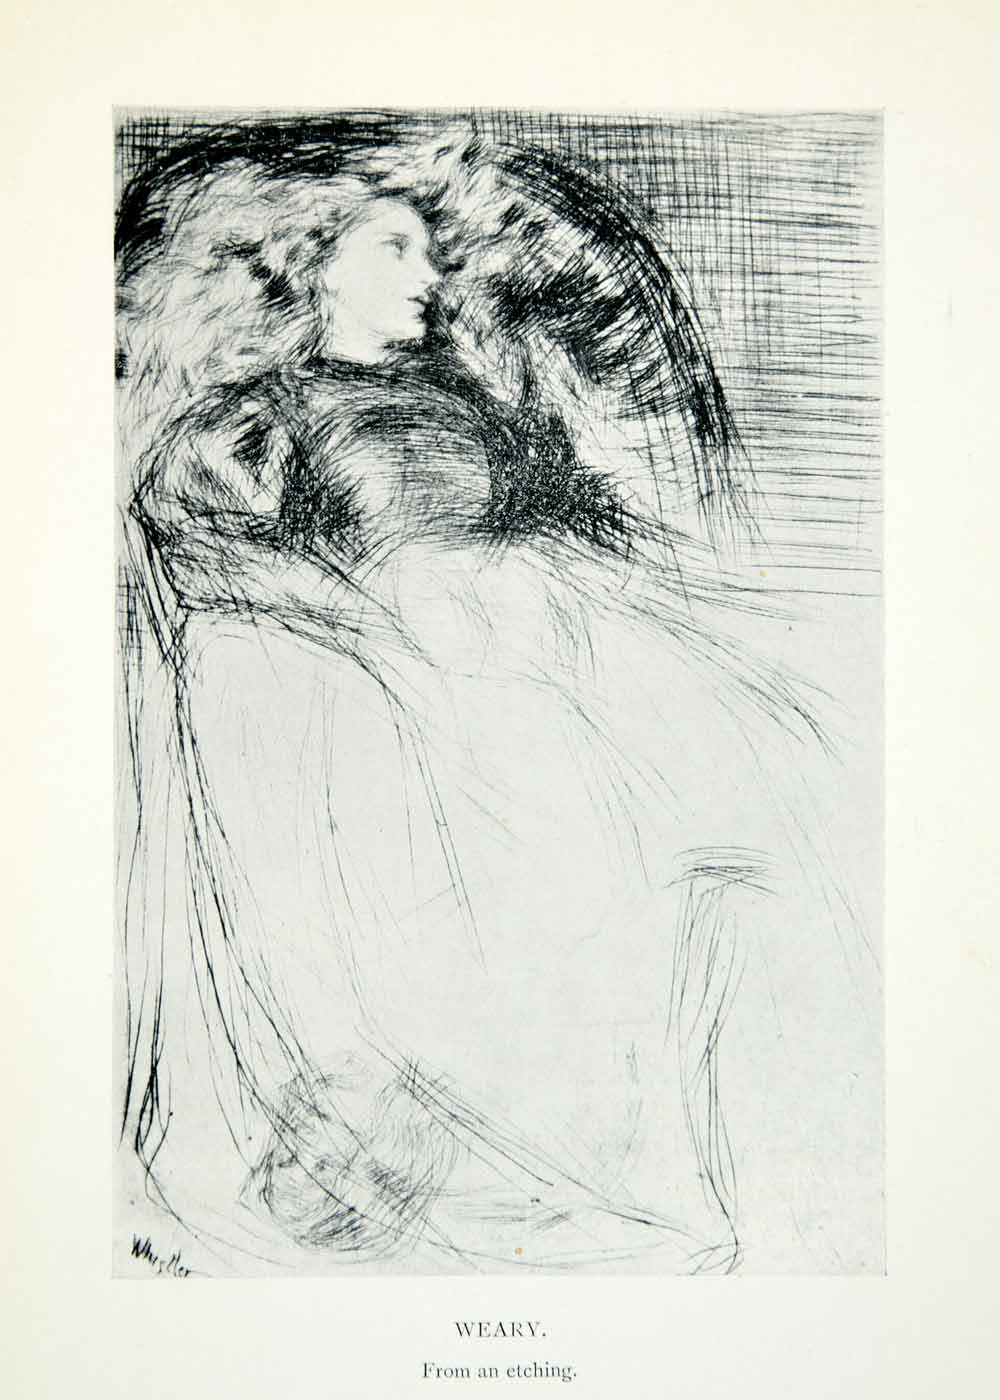 1904 Print James McNeill Whistler Weary Woman Tired Snooze Nap Lazy Sketch XALA5